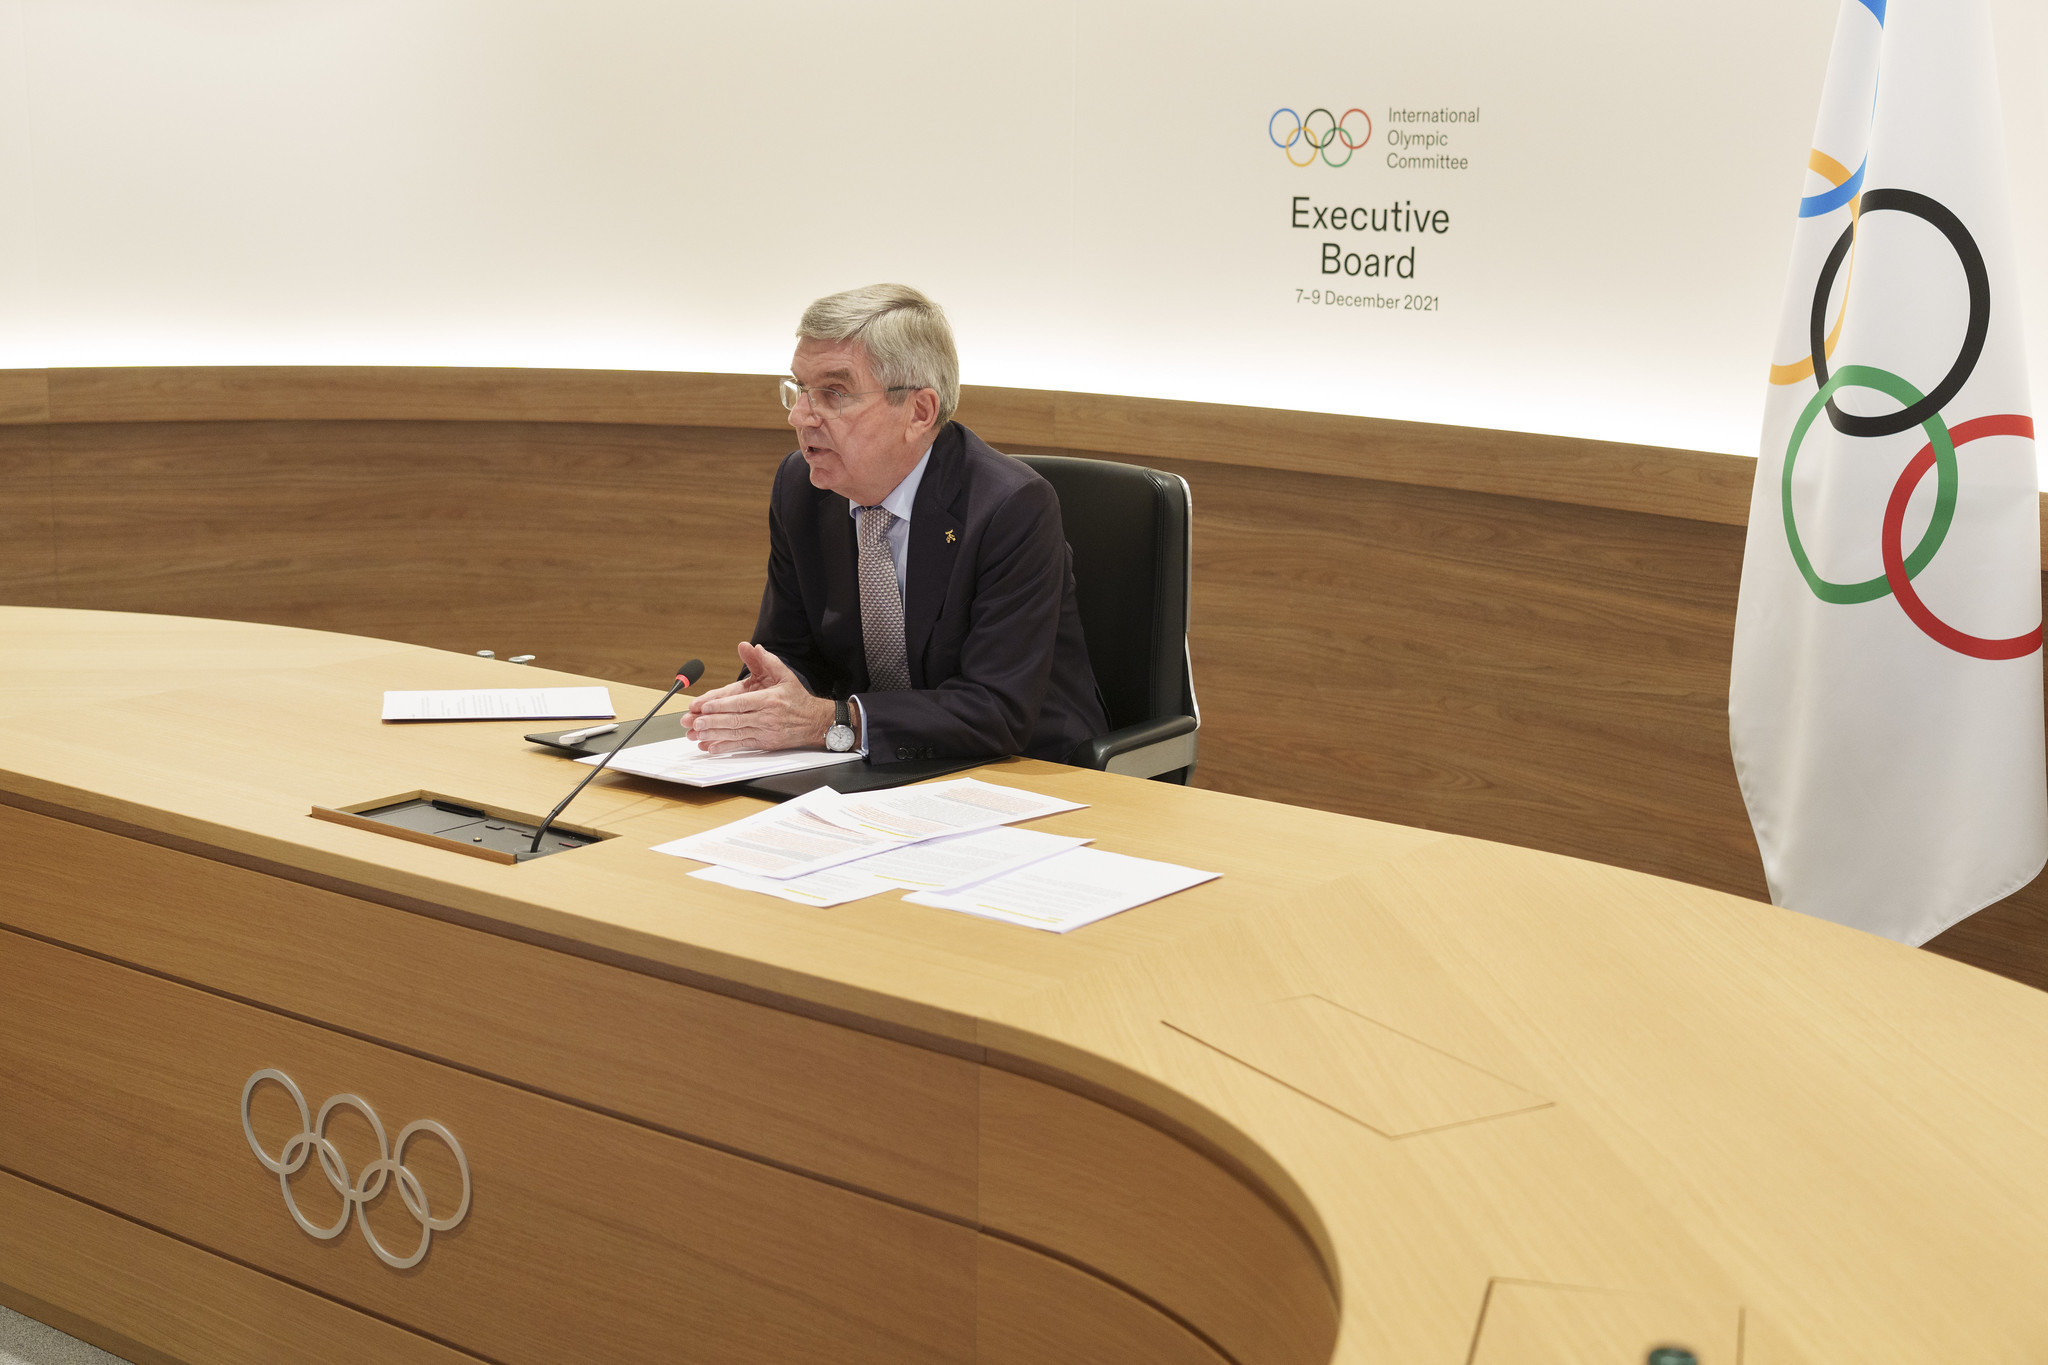 IOC President Thomas Bach issued said the IWF must show governance change by 2023 to be included on the Los Angeles 2028 programme ©IOC